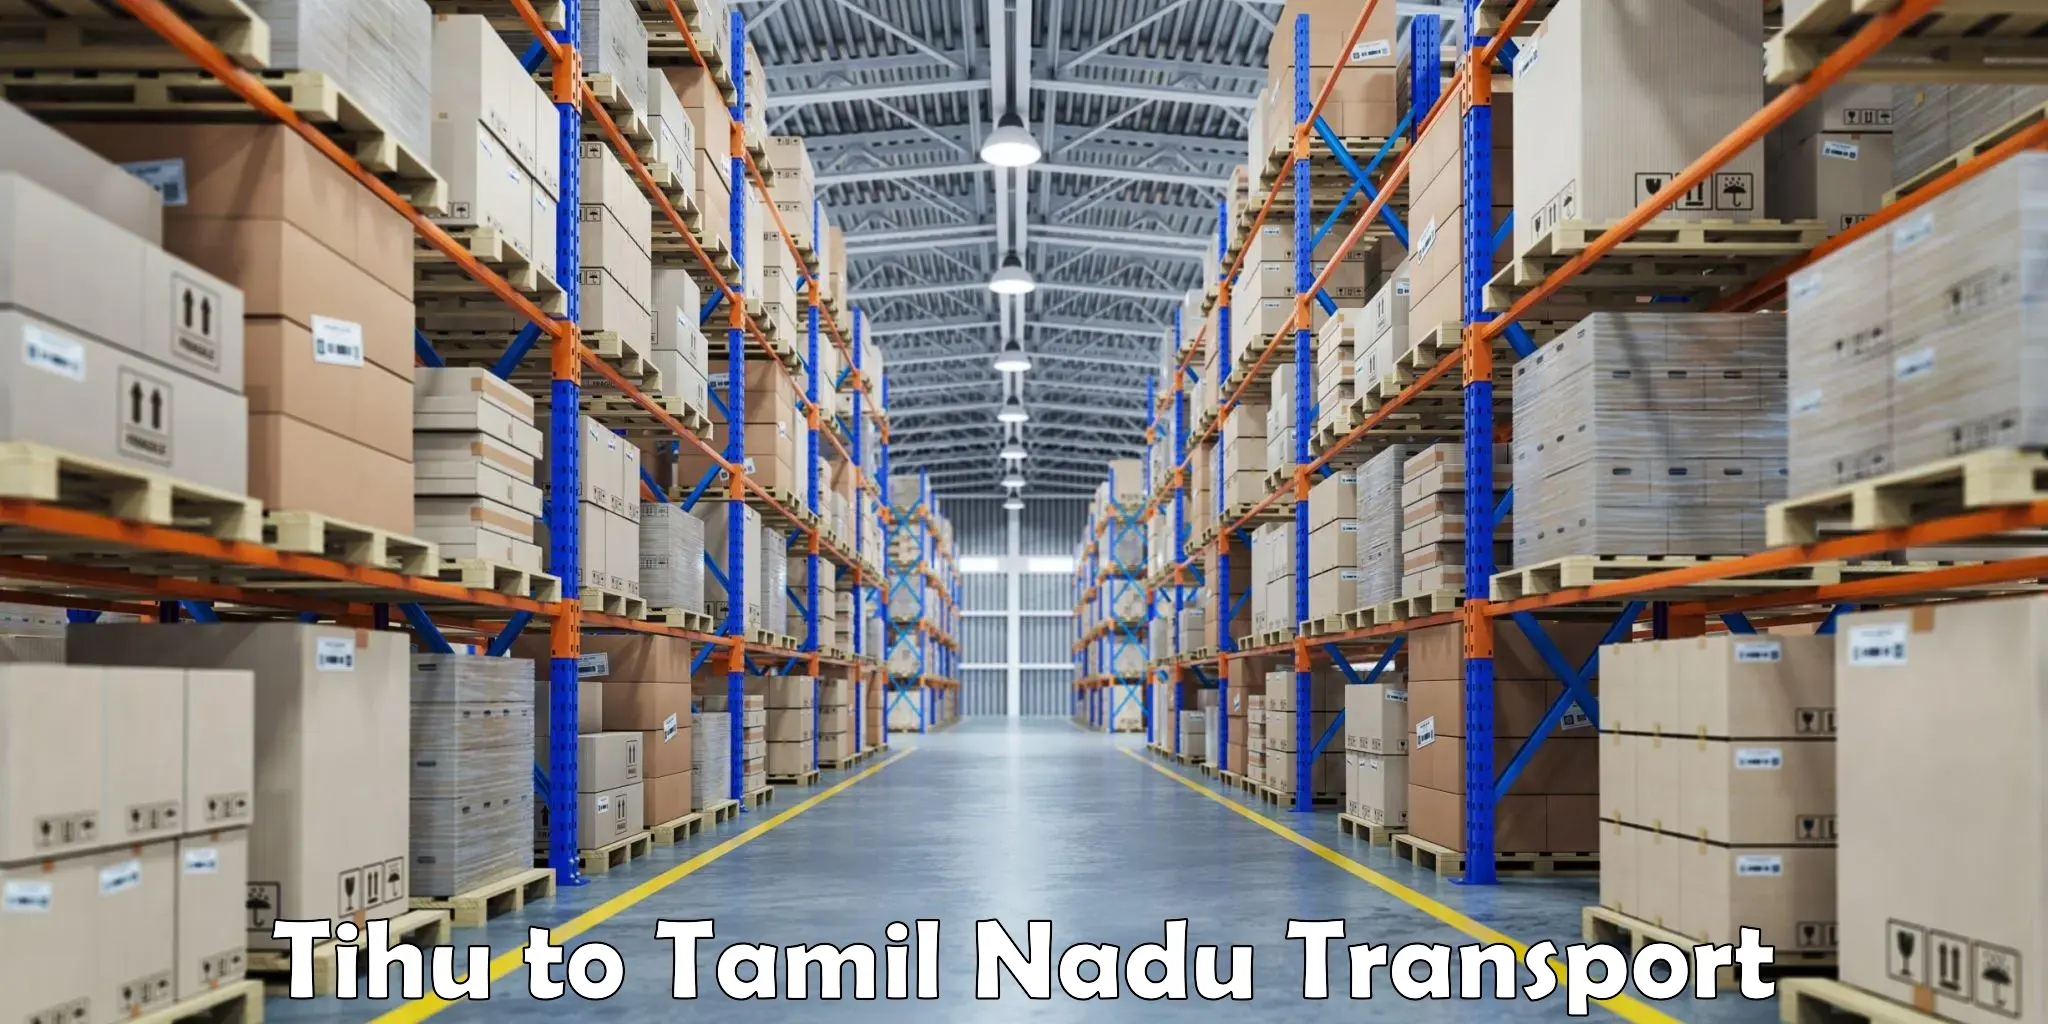 Material transport services Tihu to Chennai Port